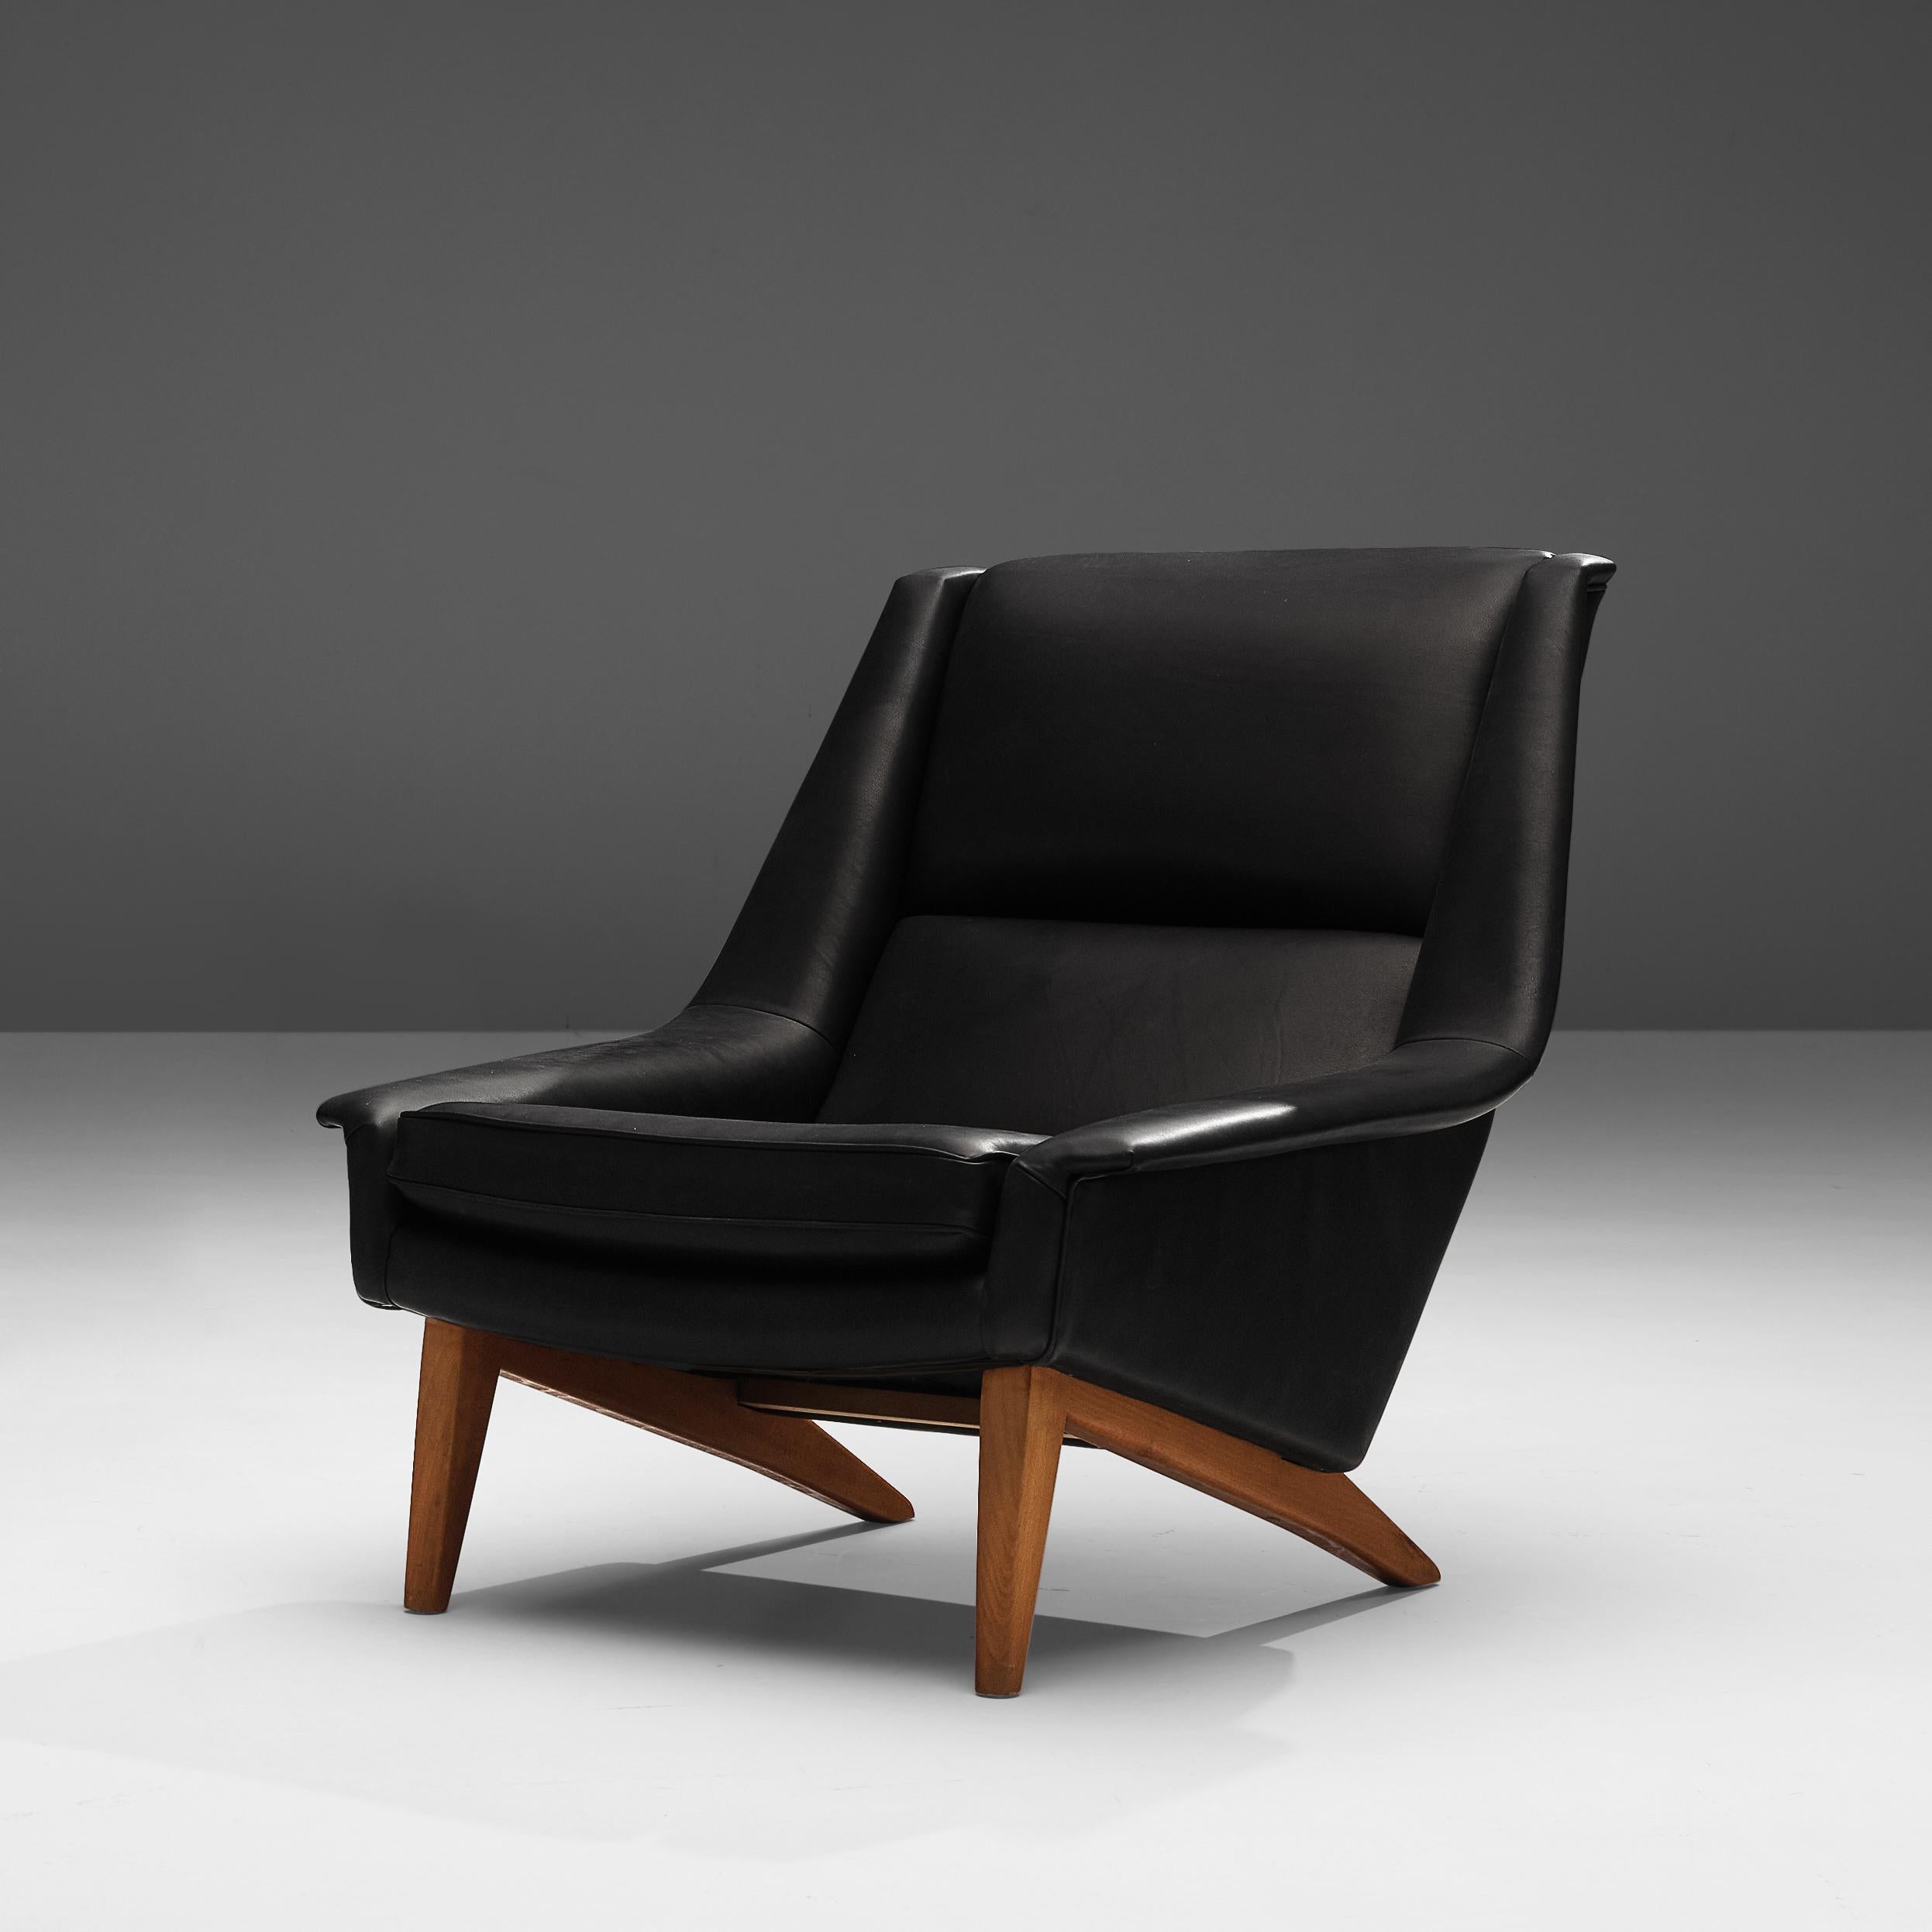 Folke Ohlsson for Fritz Hansen, lounge chair', in any preferred leather of fabric, teak, Denmark, designed in 1957 

This high quality made lounge chair is made to reach an ultimate level of comfort as can clearly be recognized in the design.